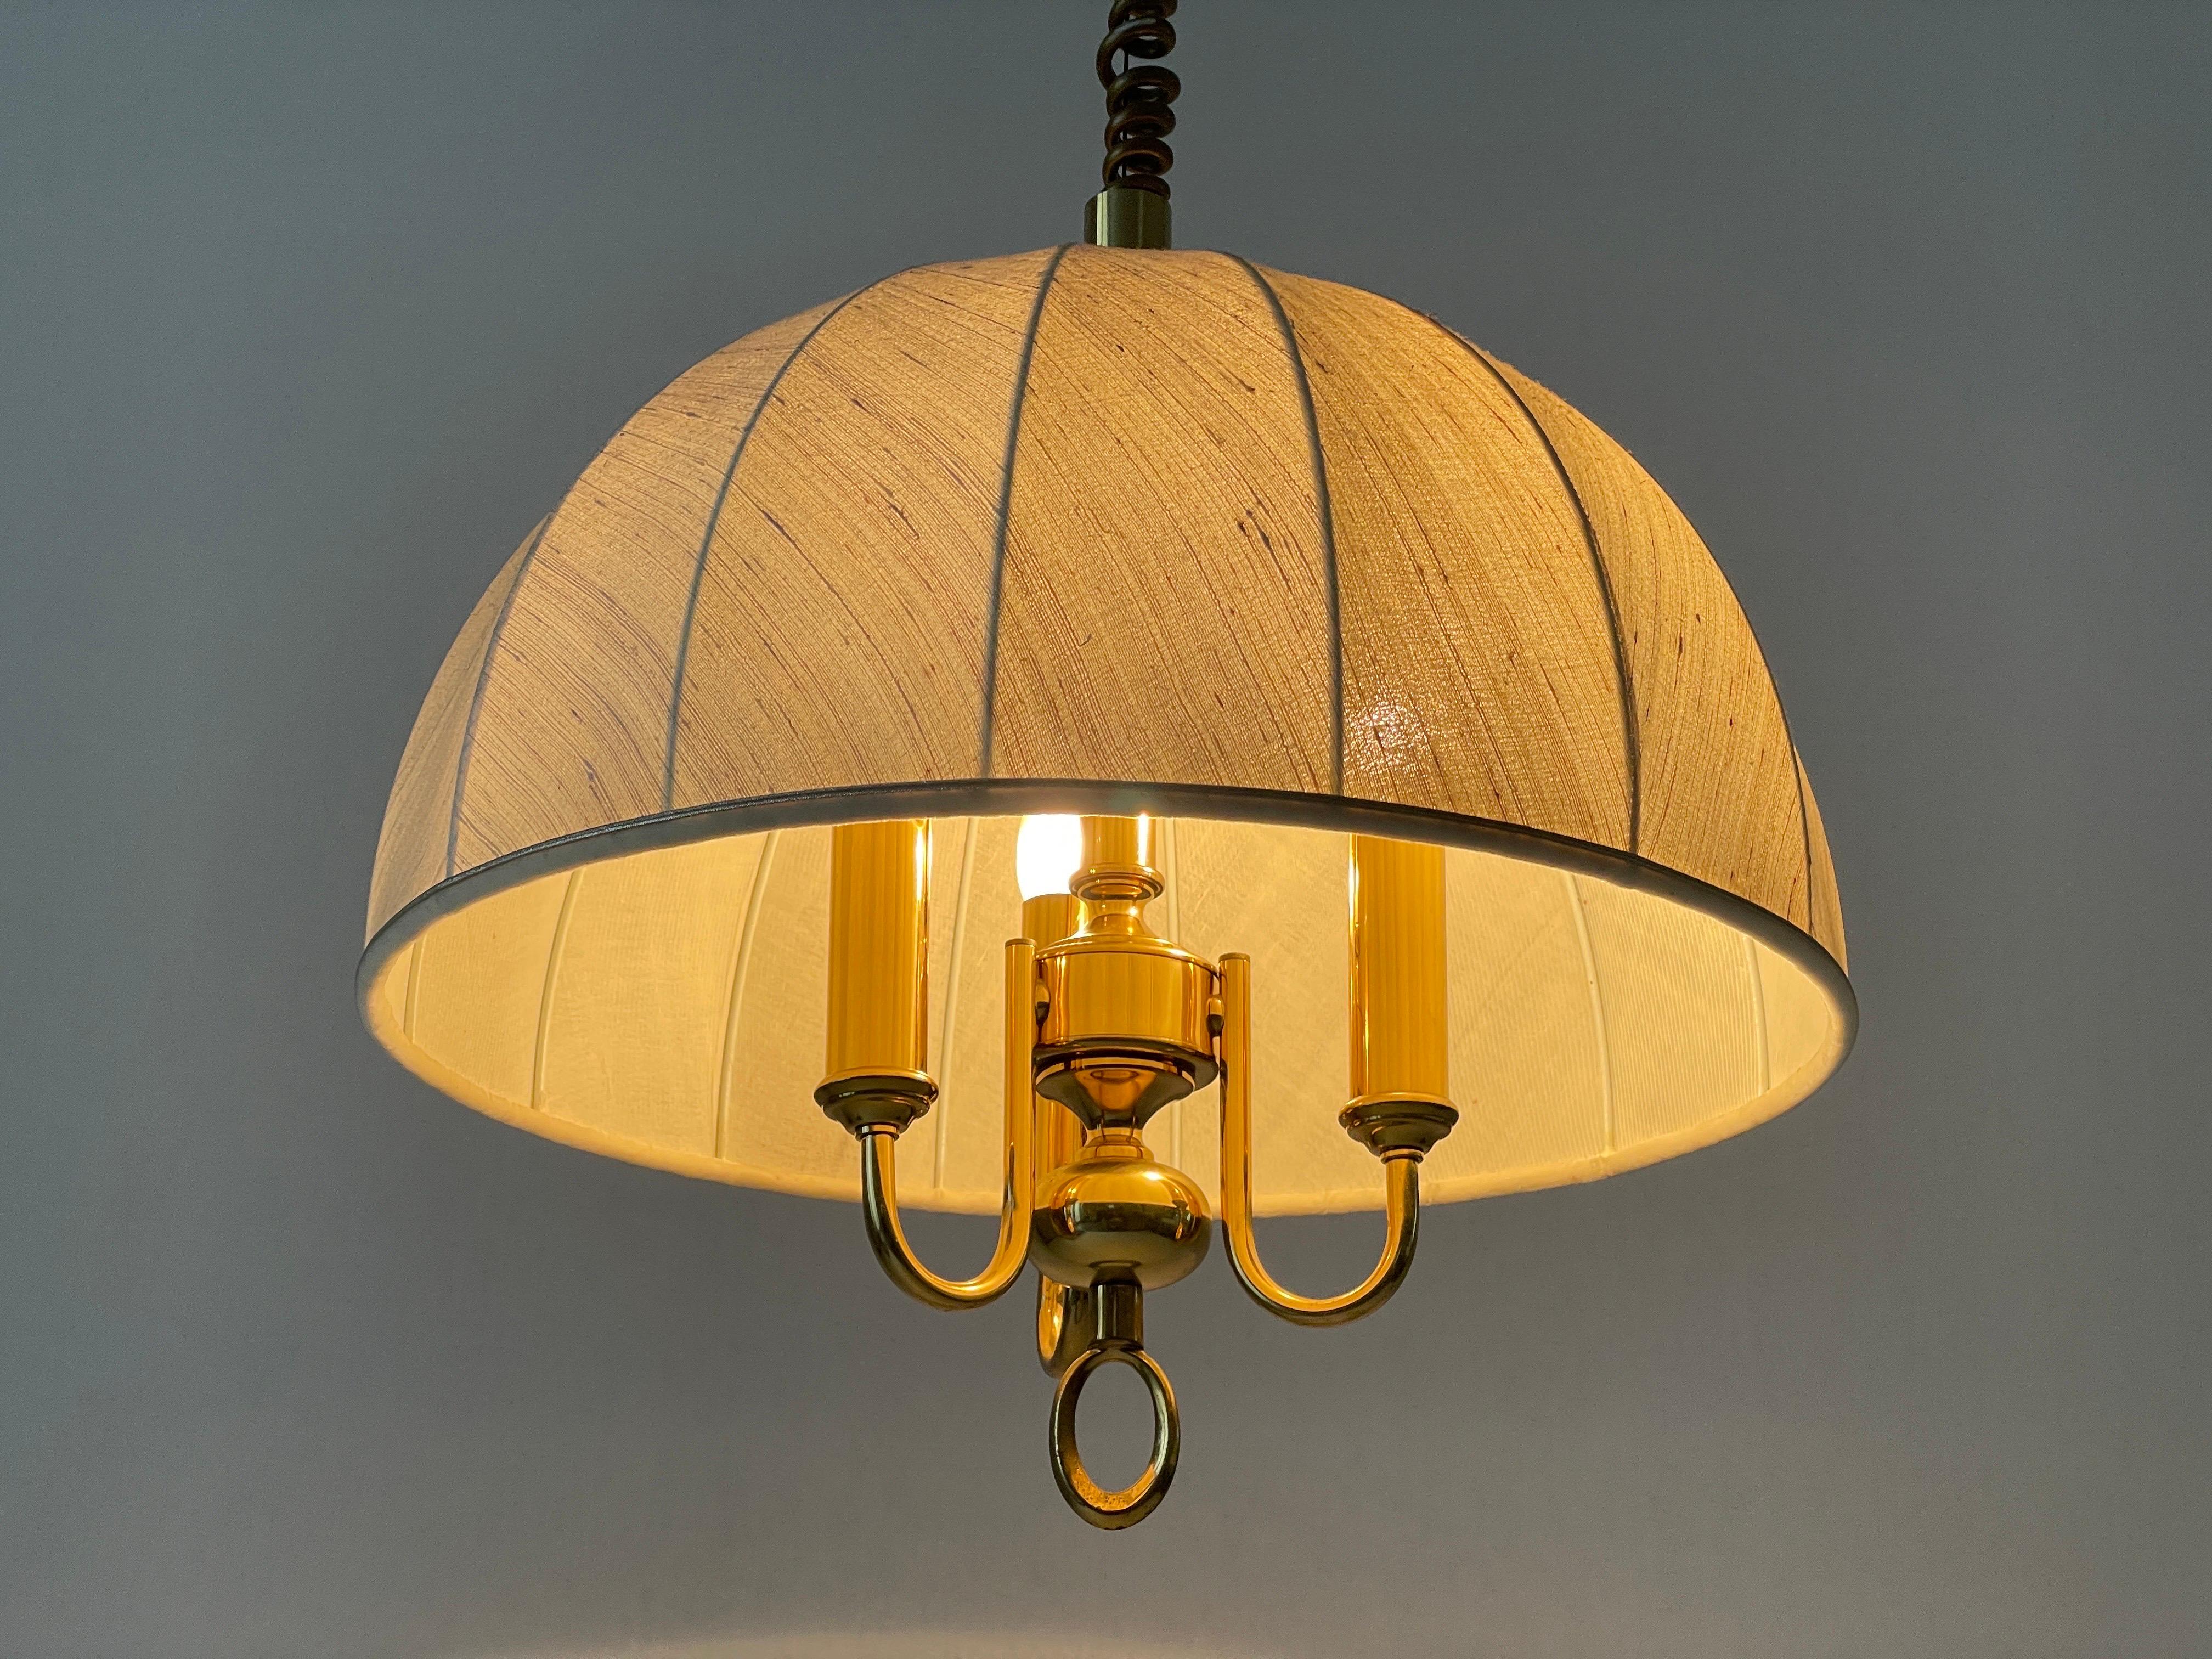 Fabric and Brass 3 socket Adjustable Shade Pendant Lamp by WKR, 1970s, Germany For Sale 11